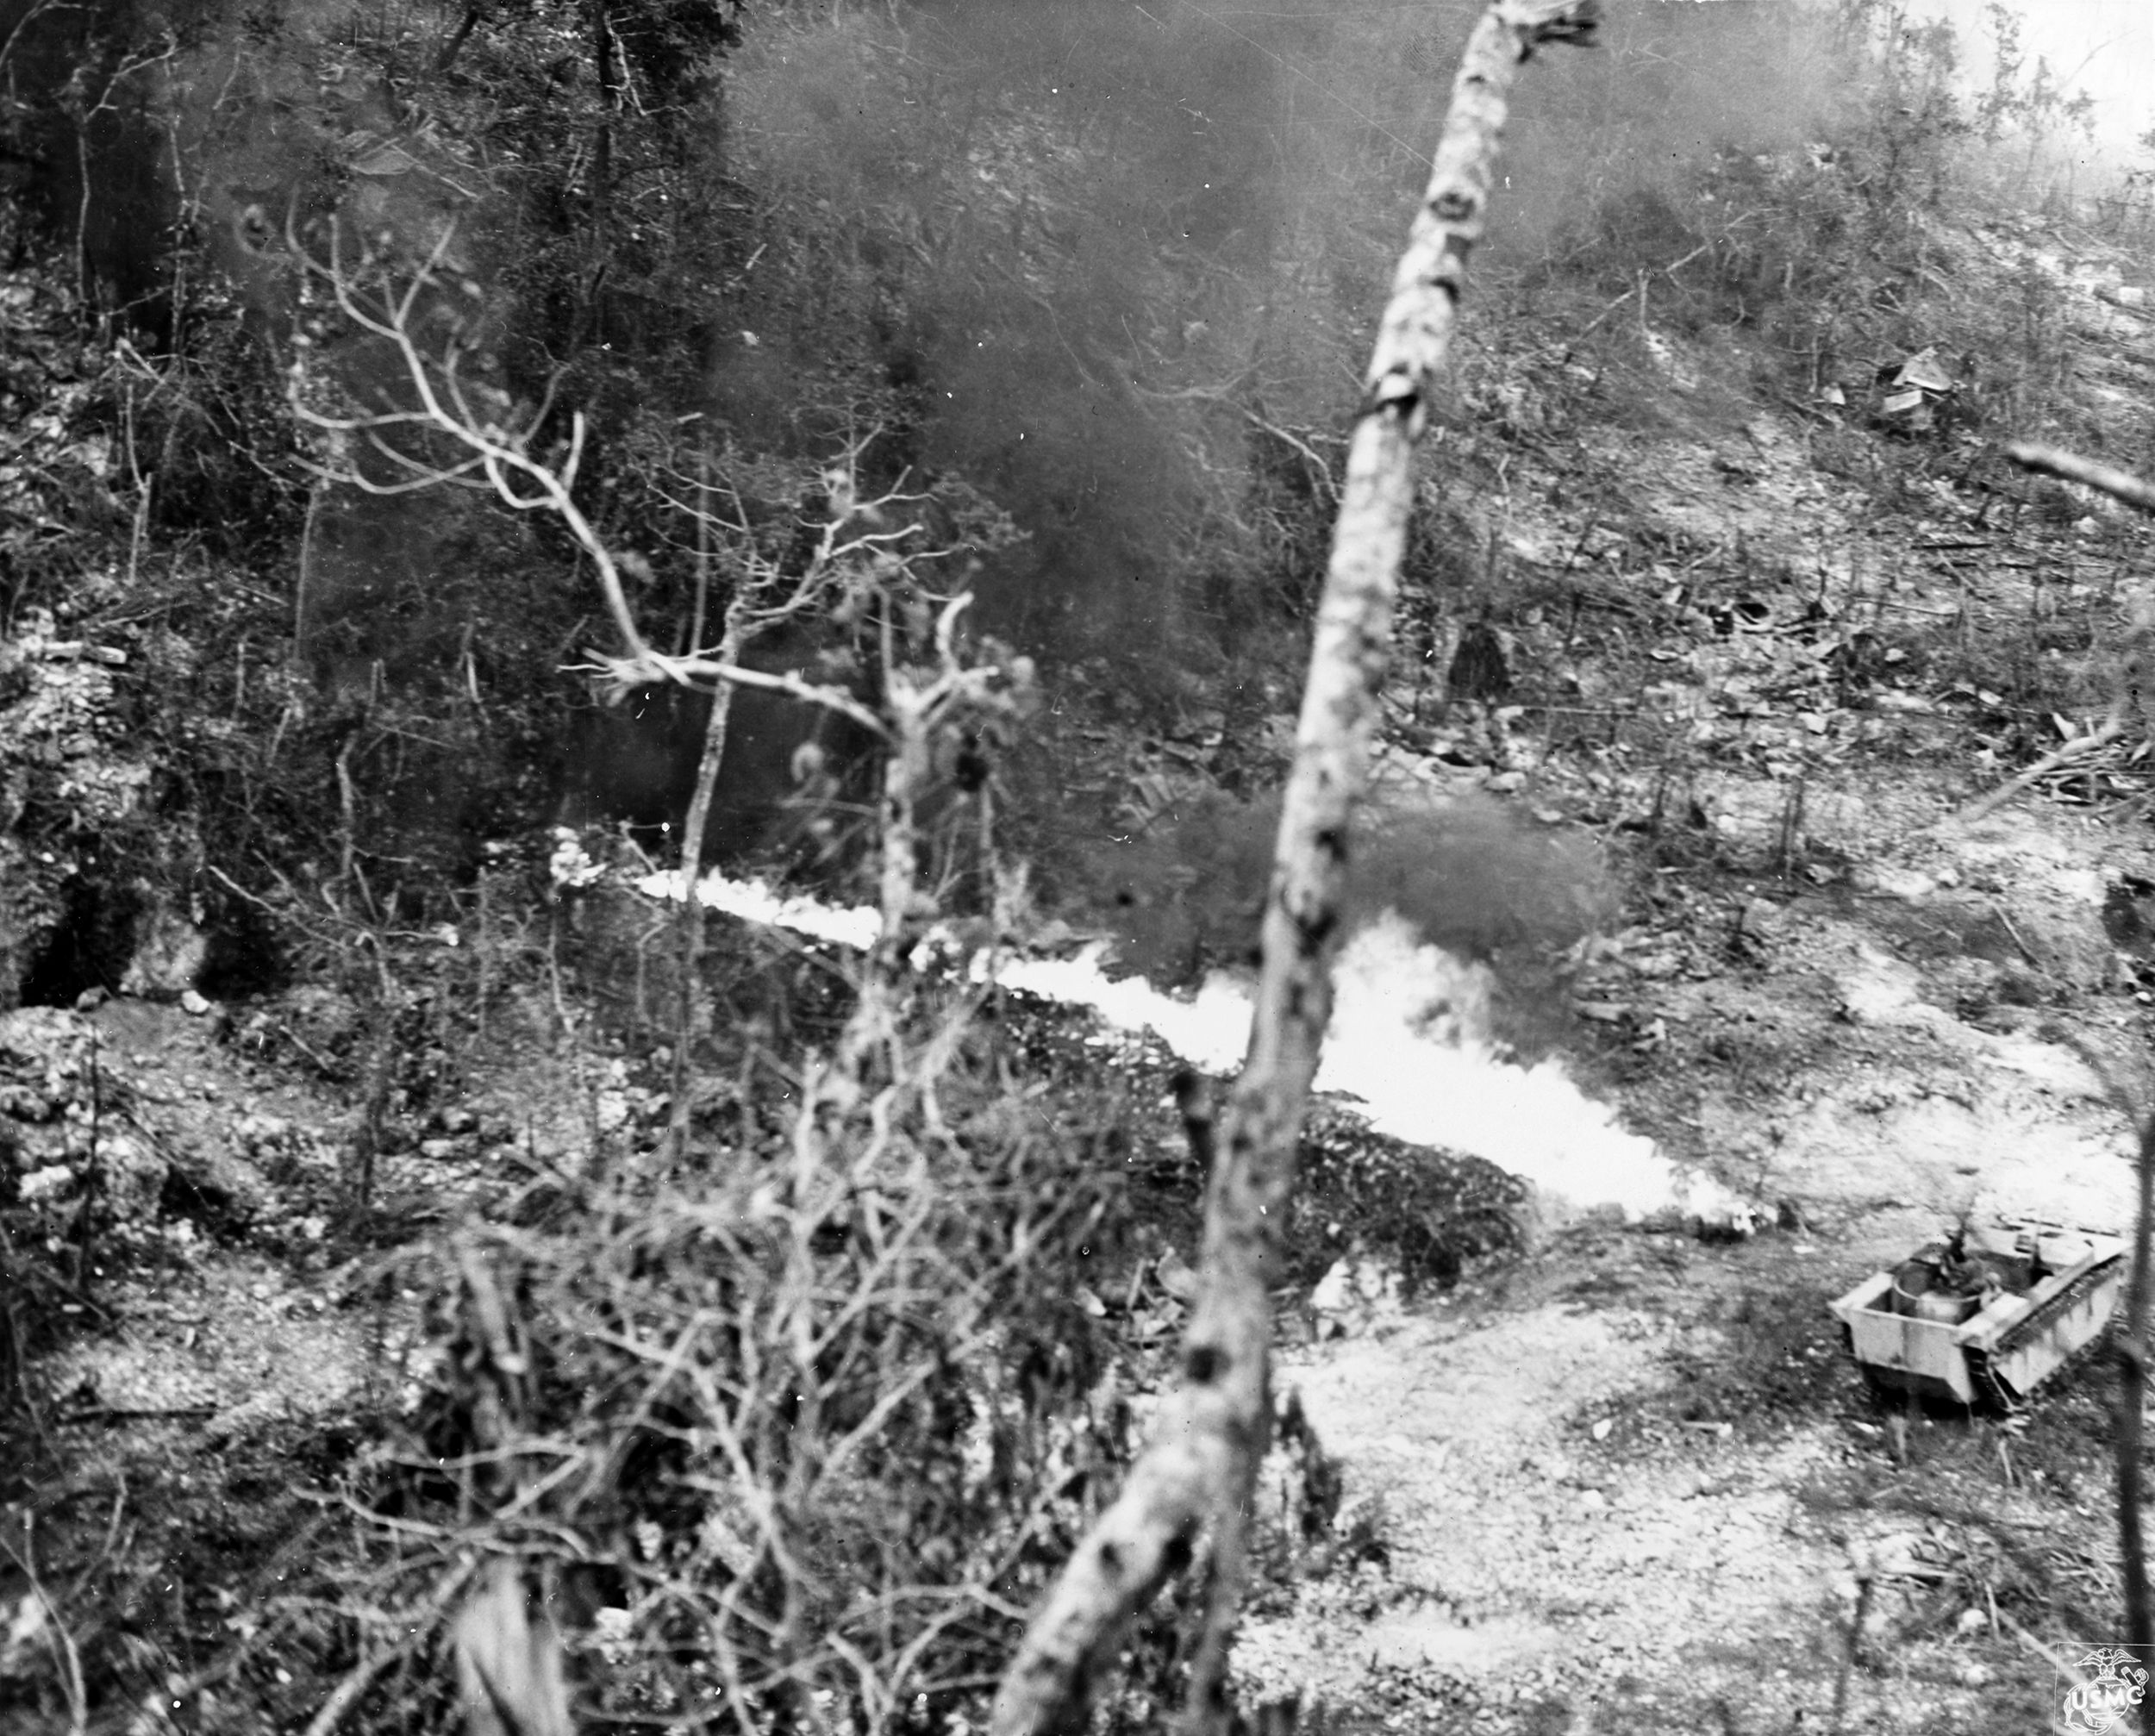 A Marine flame thrower LVT Amtrac in action on Peleliu, in the Palau Islands, September,1944. It would take Army and Marine forces until nearly the end of November to declare the island secure. Even so, 26 Japanese soldiers and sailors remained in the warren of tunnels on the island until April, 1947.